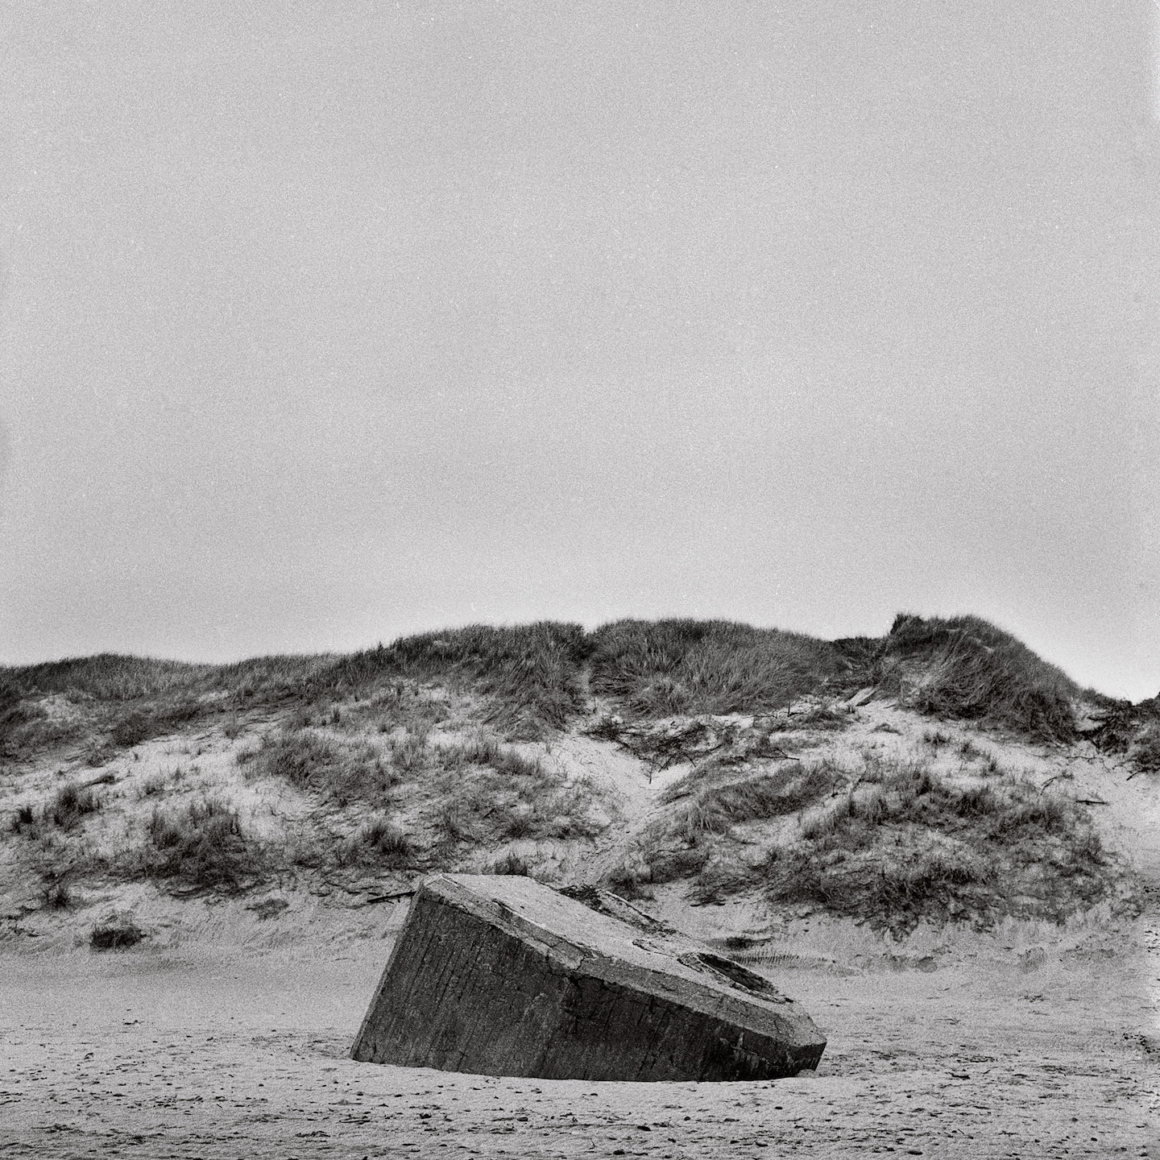 Darn Thorn. Nazi Bunker Sinking into the Sand at Ringkøbing, Denmark. Silver Gelatin Print, 20 x 20 inches, 2022-23